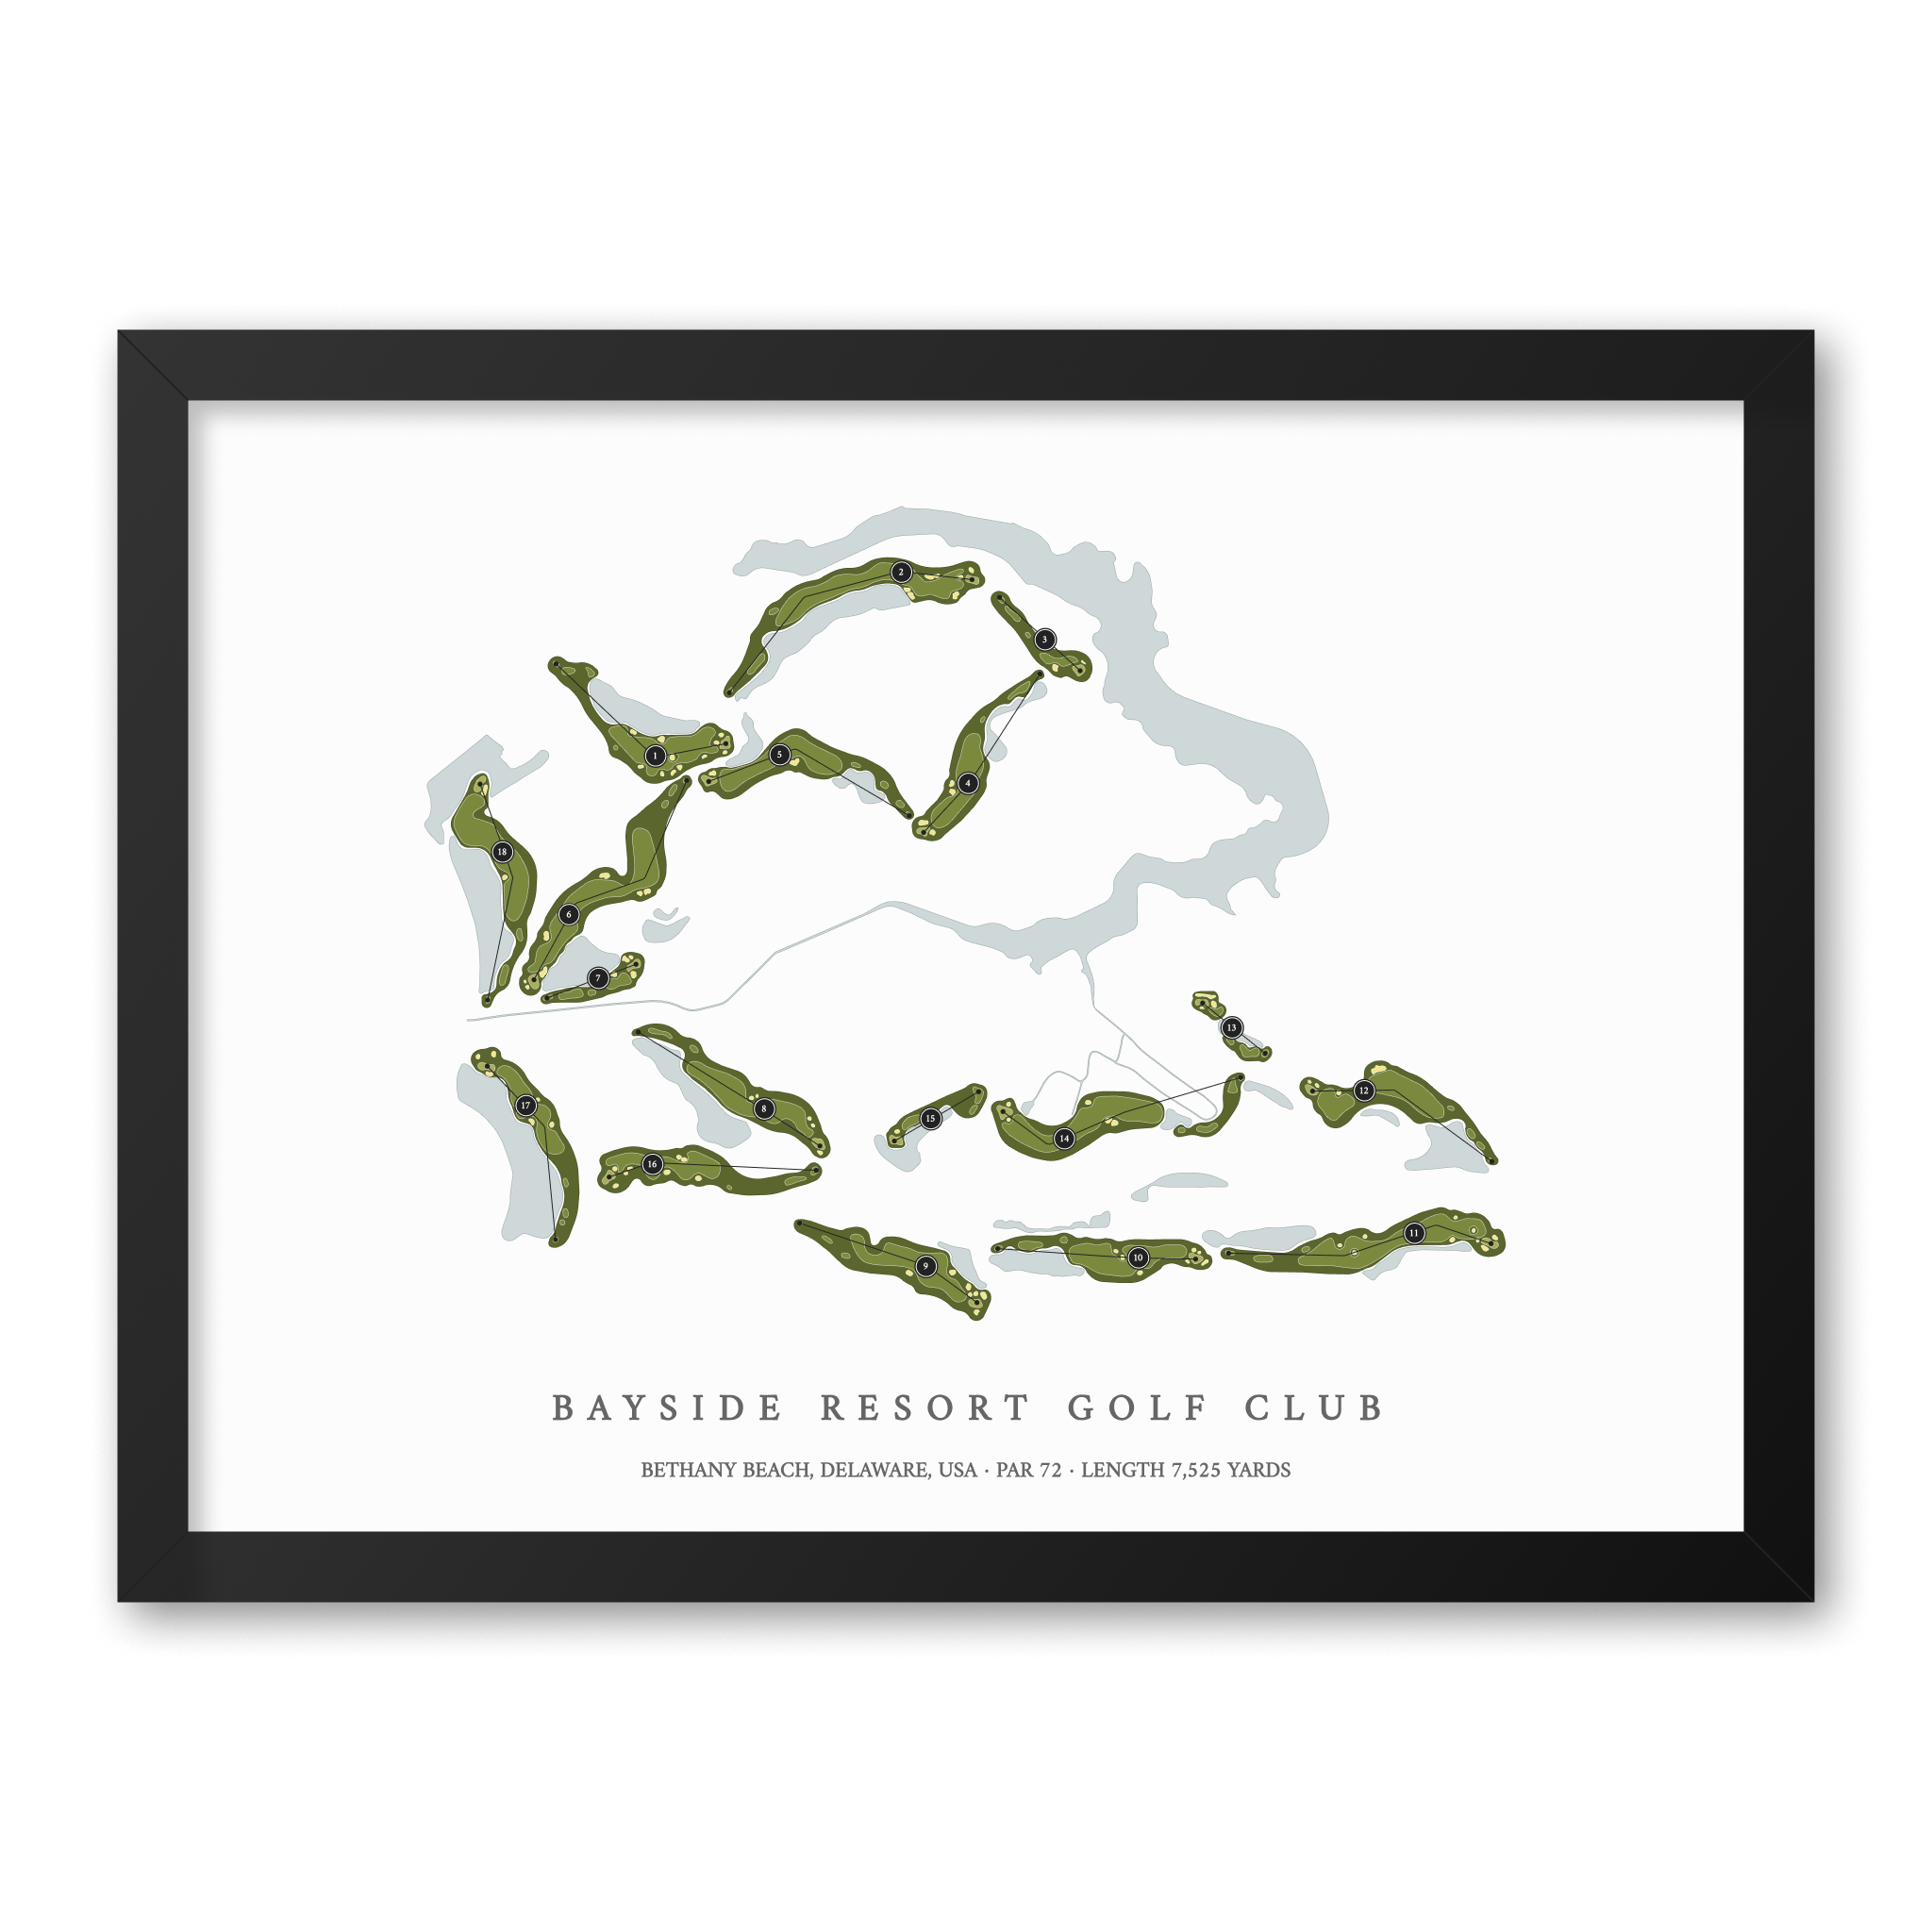 Bayside Resort Golf Club| Golf Course Print | Black Frame With Hole Numbers #hole numbers_yes